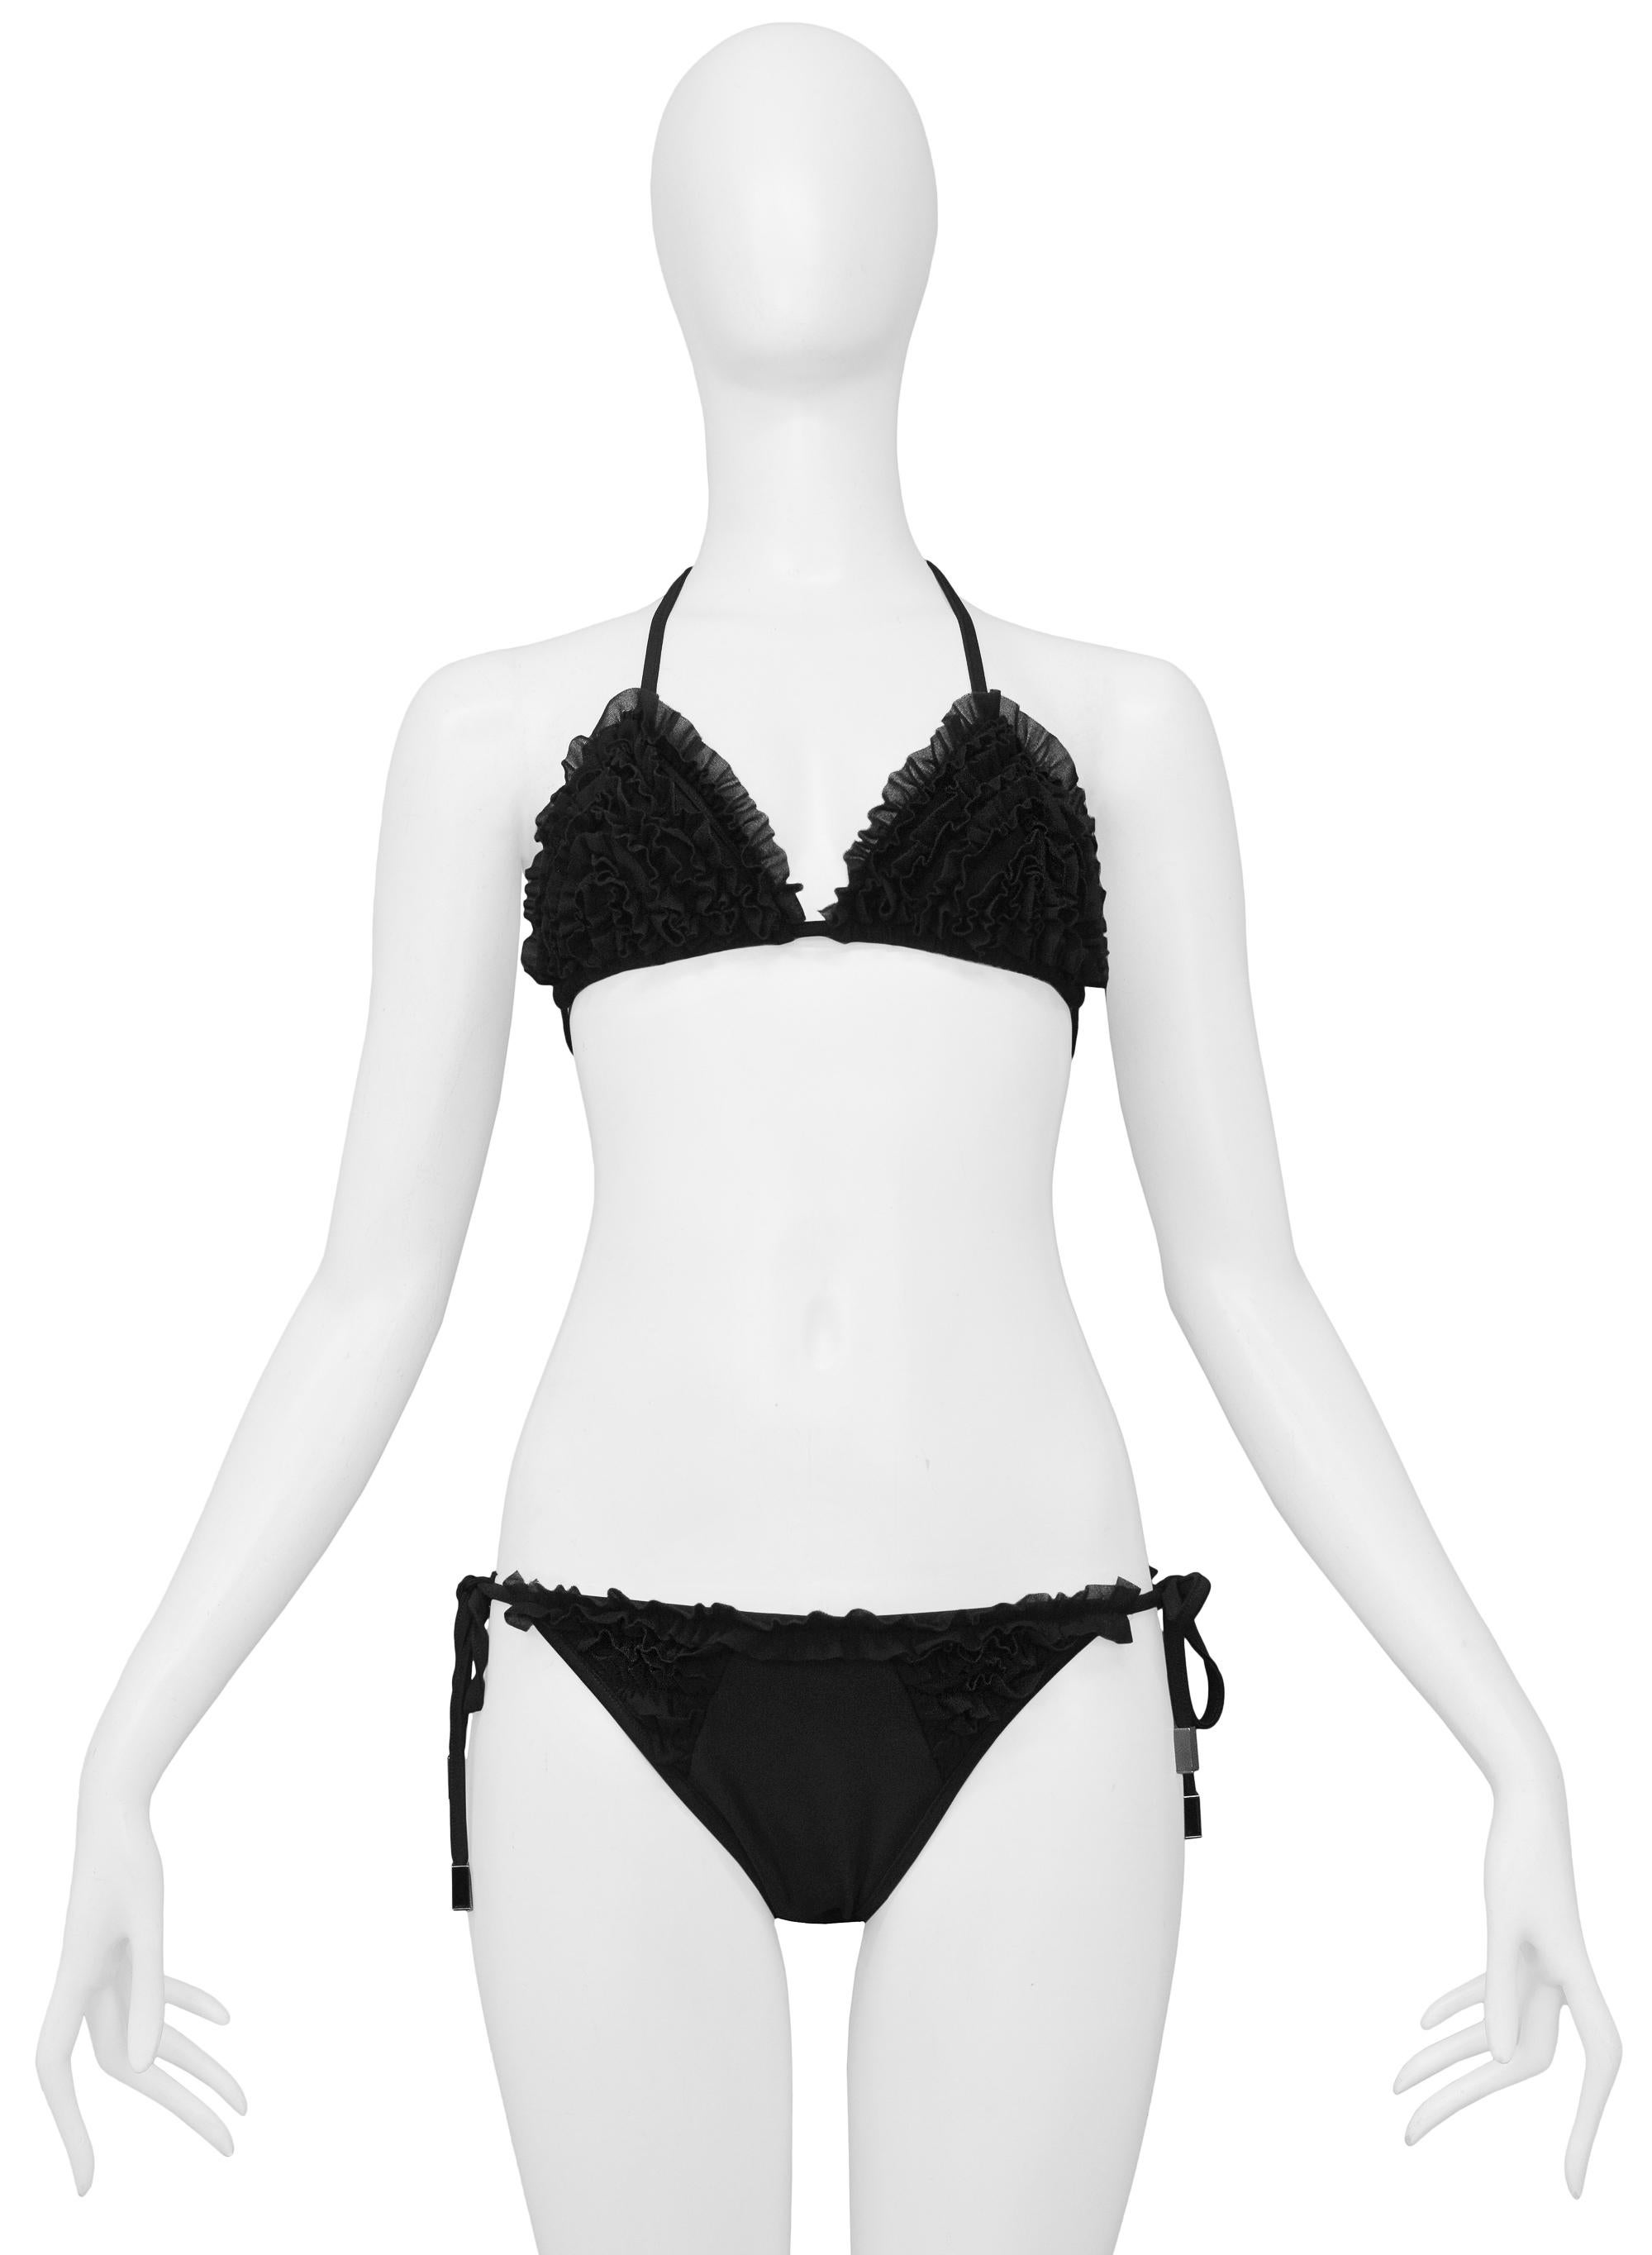 Resurrection is excited to offer a vintage Christian Dior black bikini featuring an adjustable triangle top with ruffles, side tie bottoms with ruffles, and skinny ties with chrome hardware. 

Christian Dior Paris
Designed by John Galliano
Size